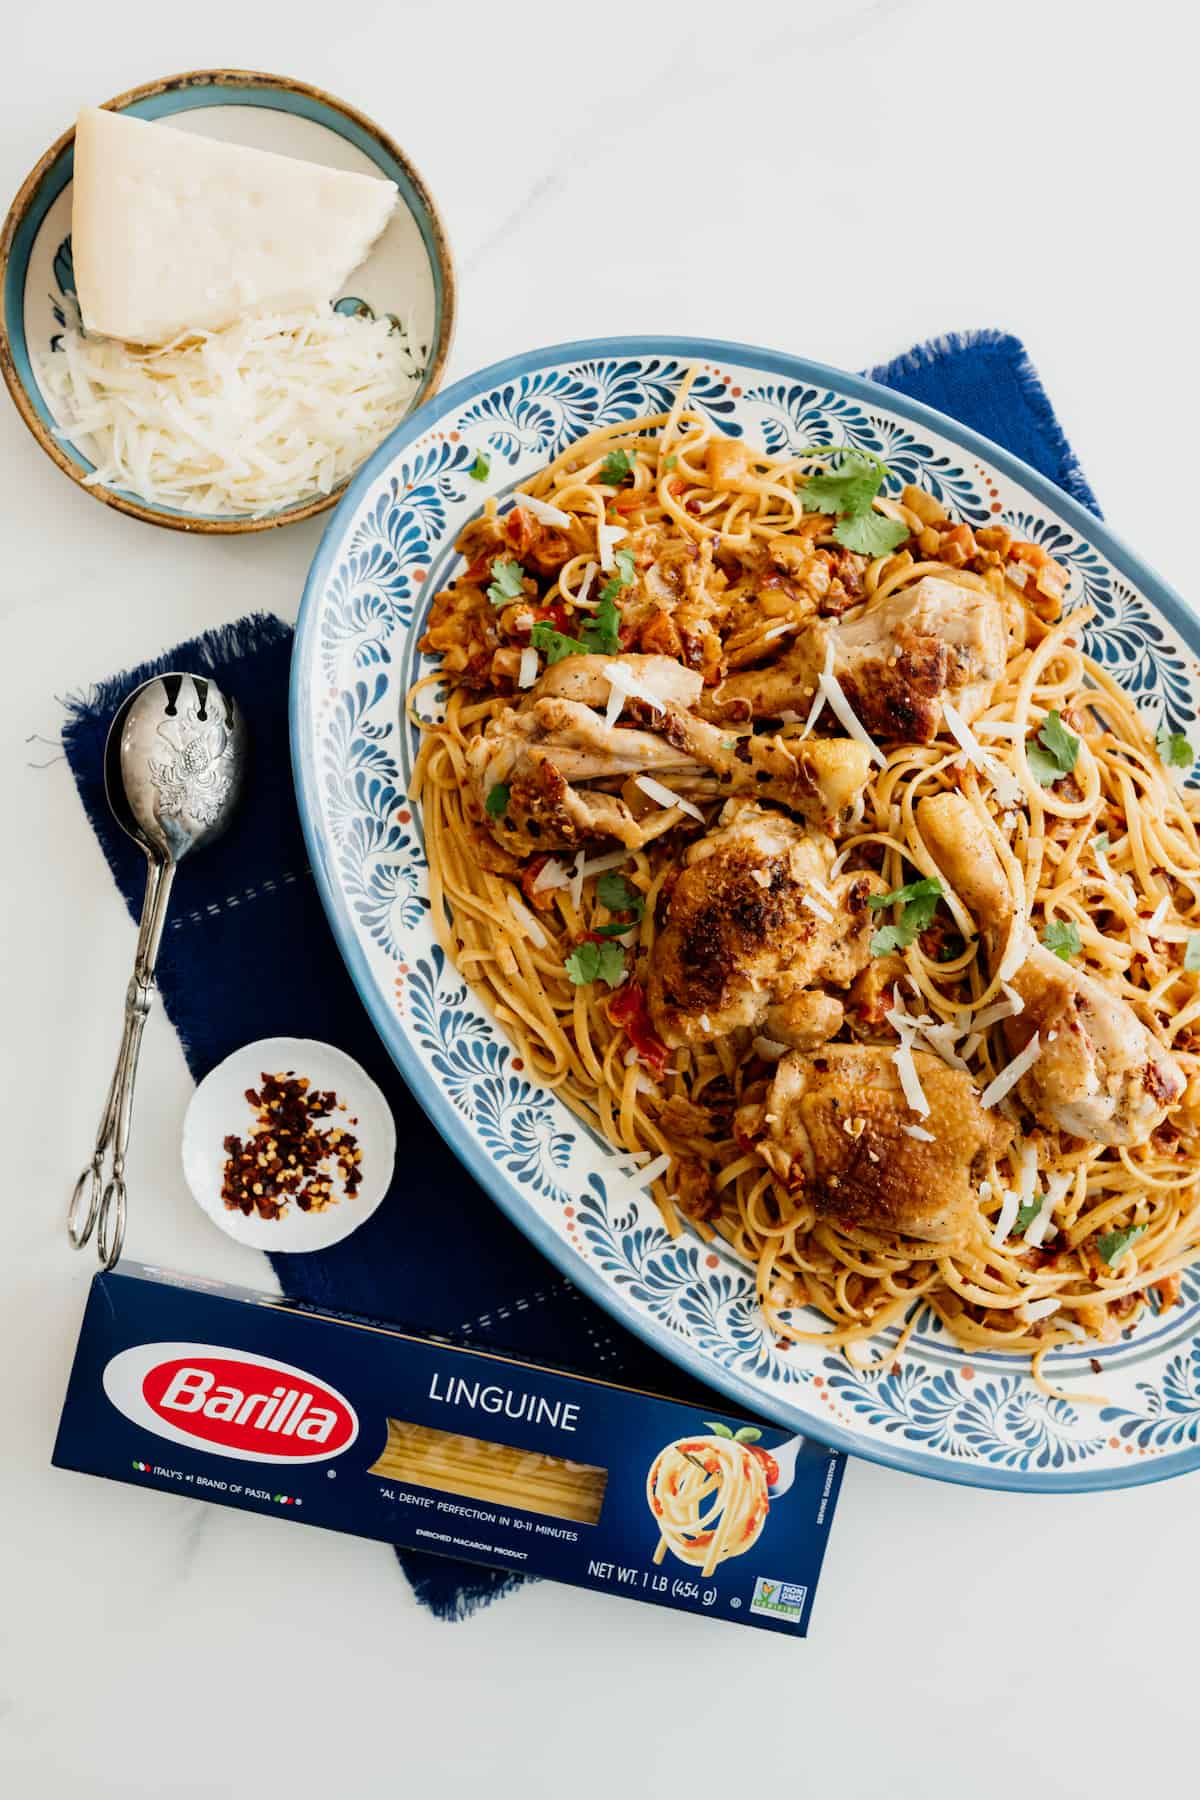 barilla linguine box on the side of a platter if chicken pasta